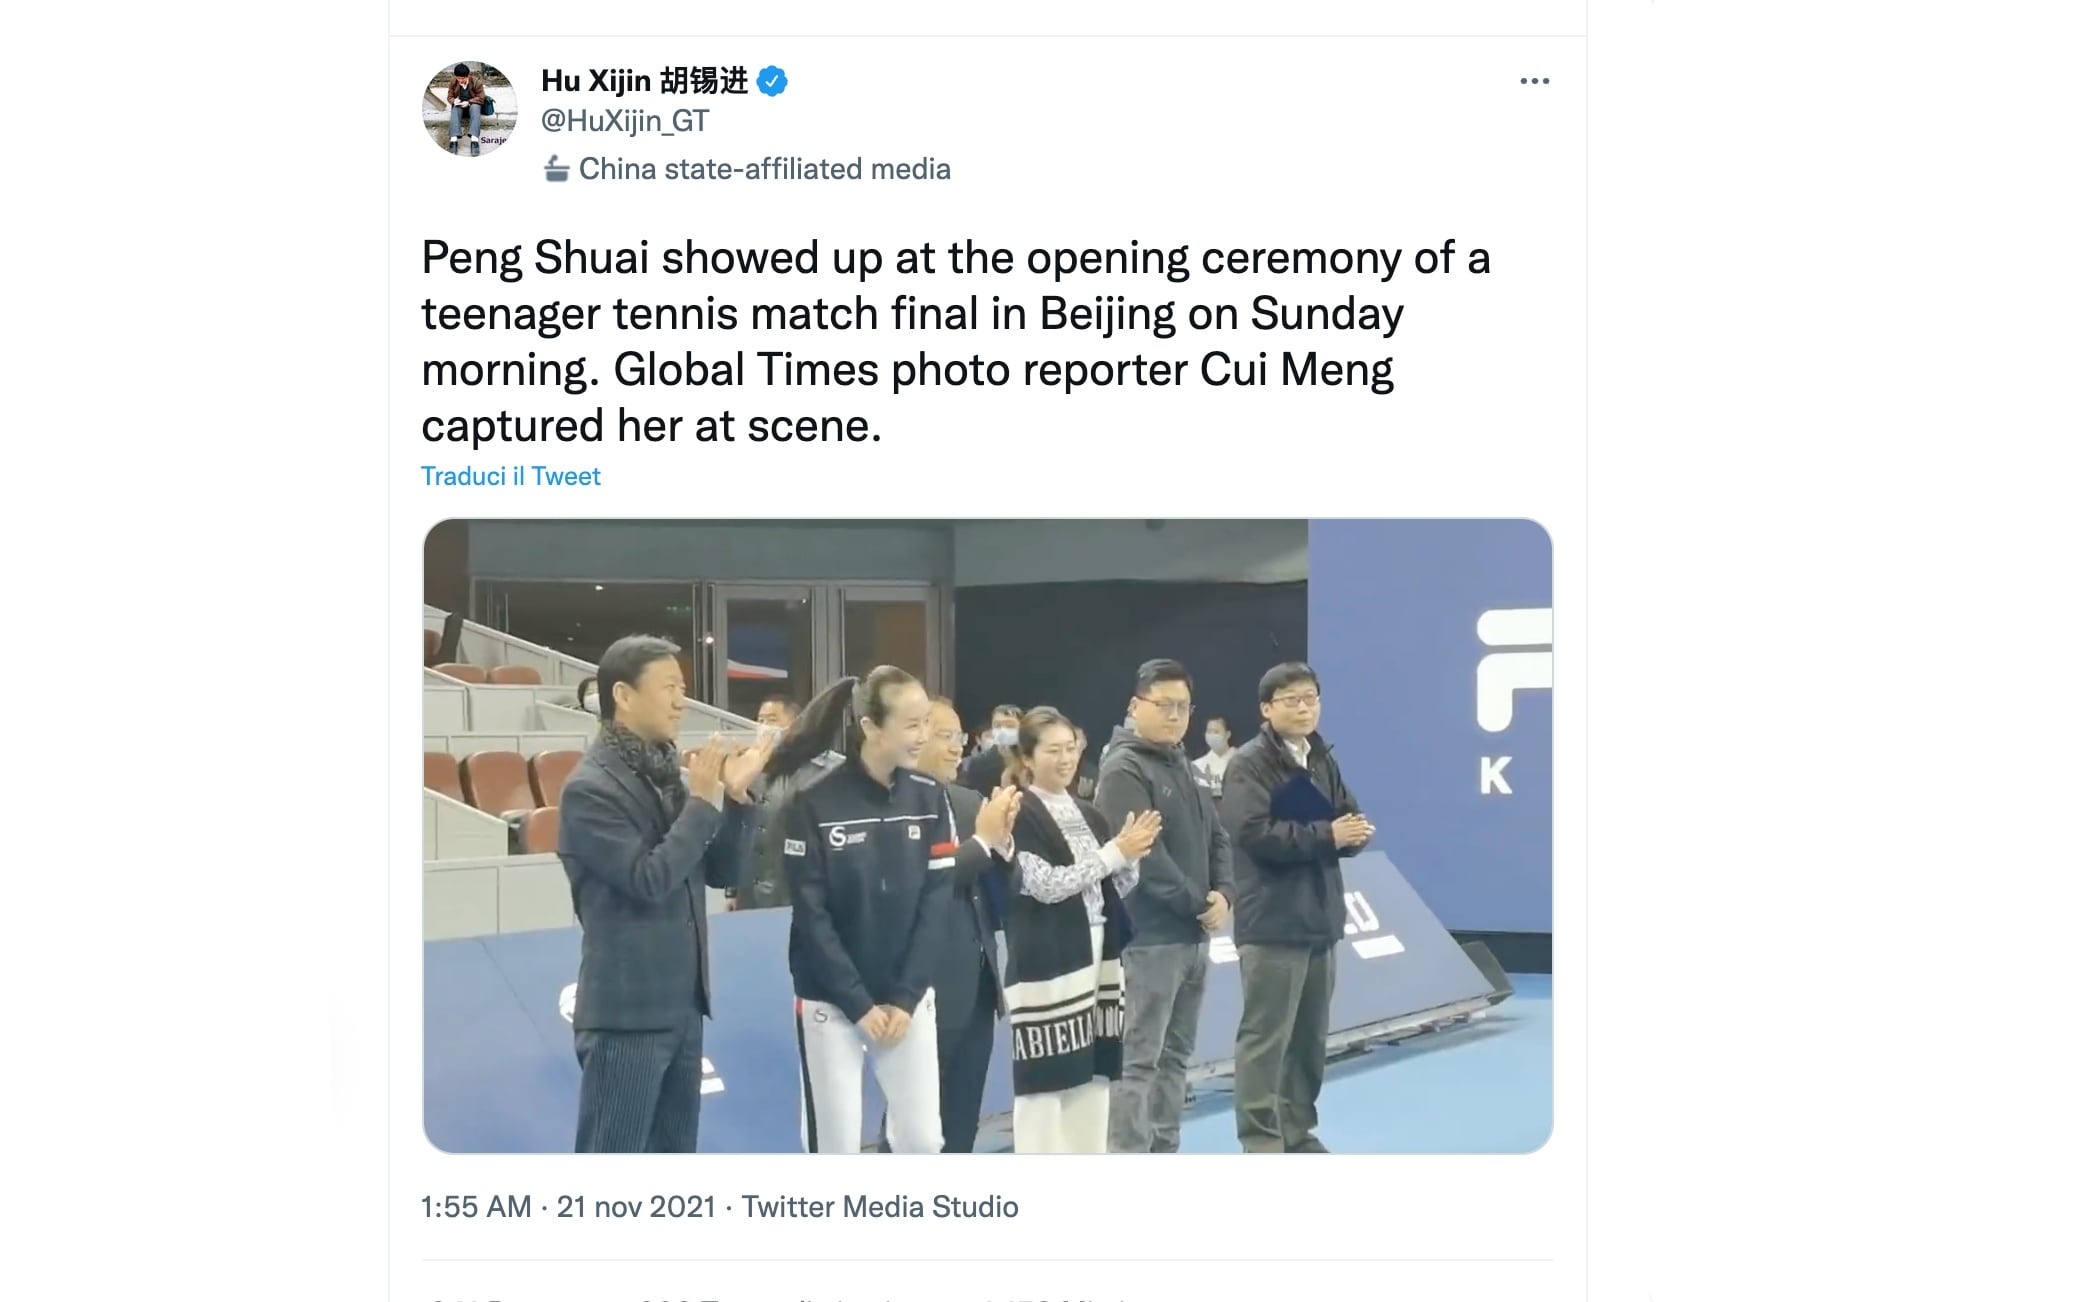 China, tennis player Peng Shuai appears in images of a public event in Beijing